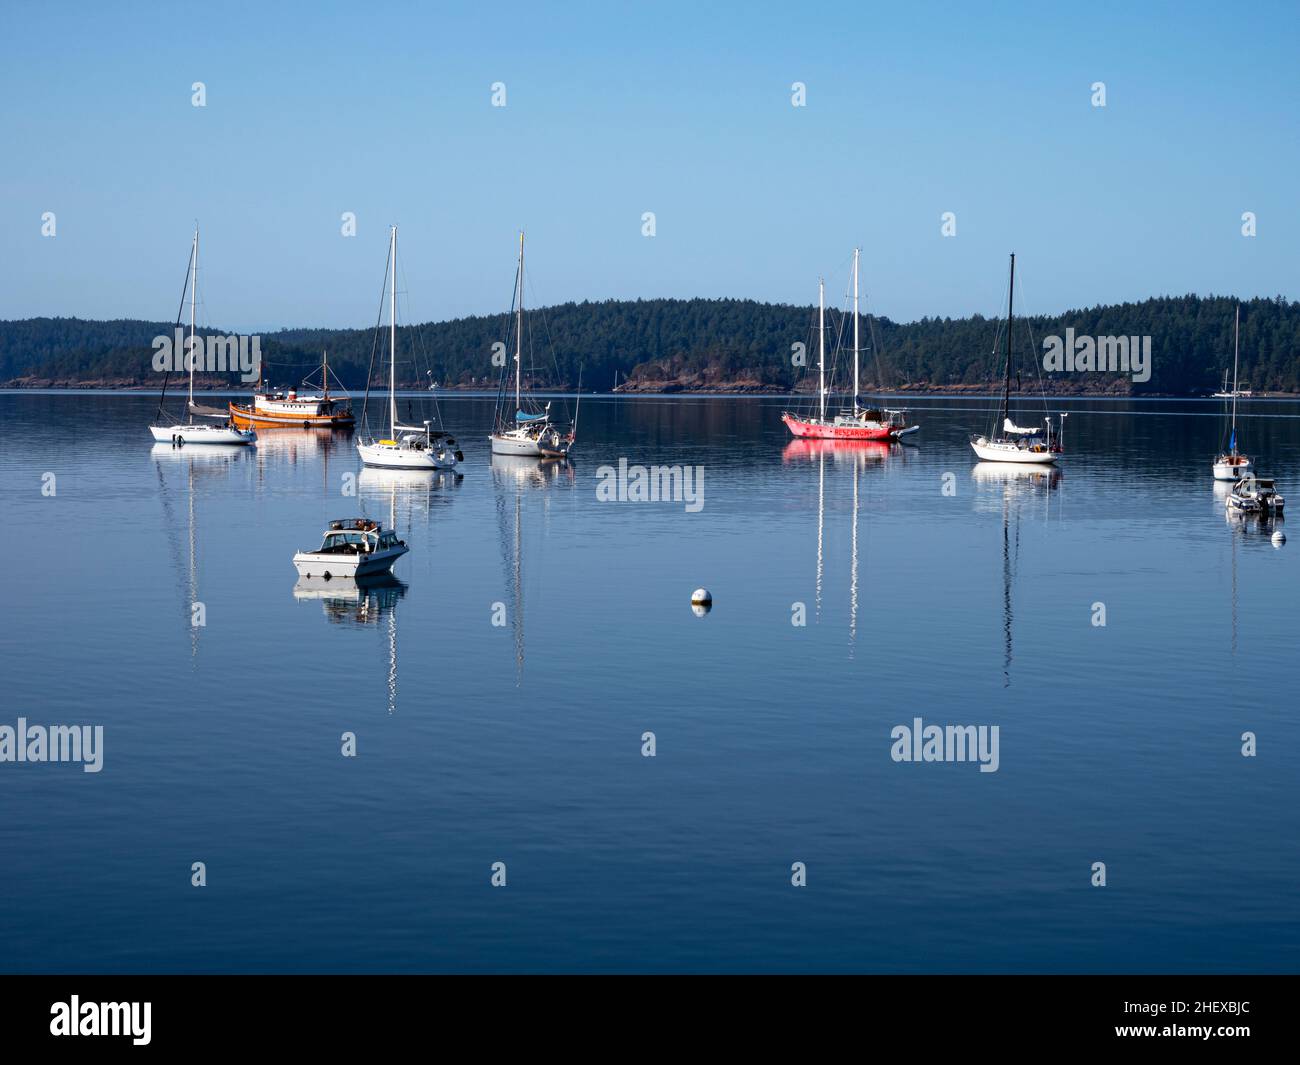 WA21087-00...WASHINGTON -Boats moored in the calm waters of West Sound at Orcas Island. Stock Photo